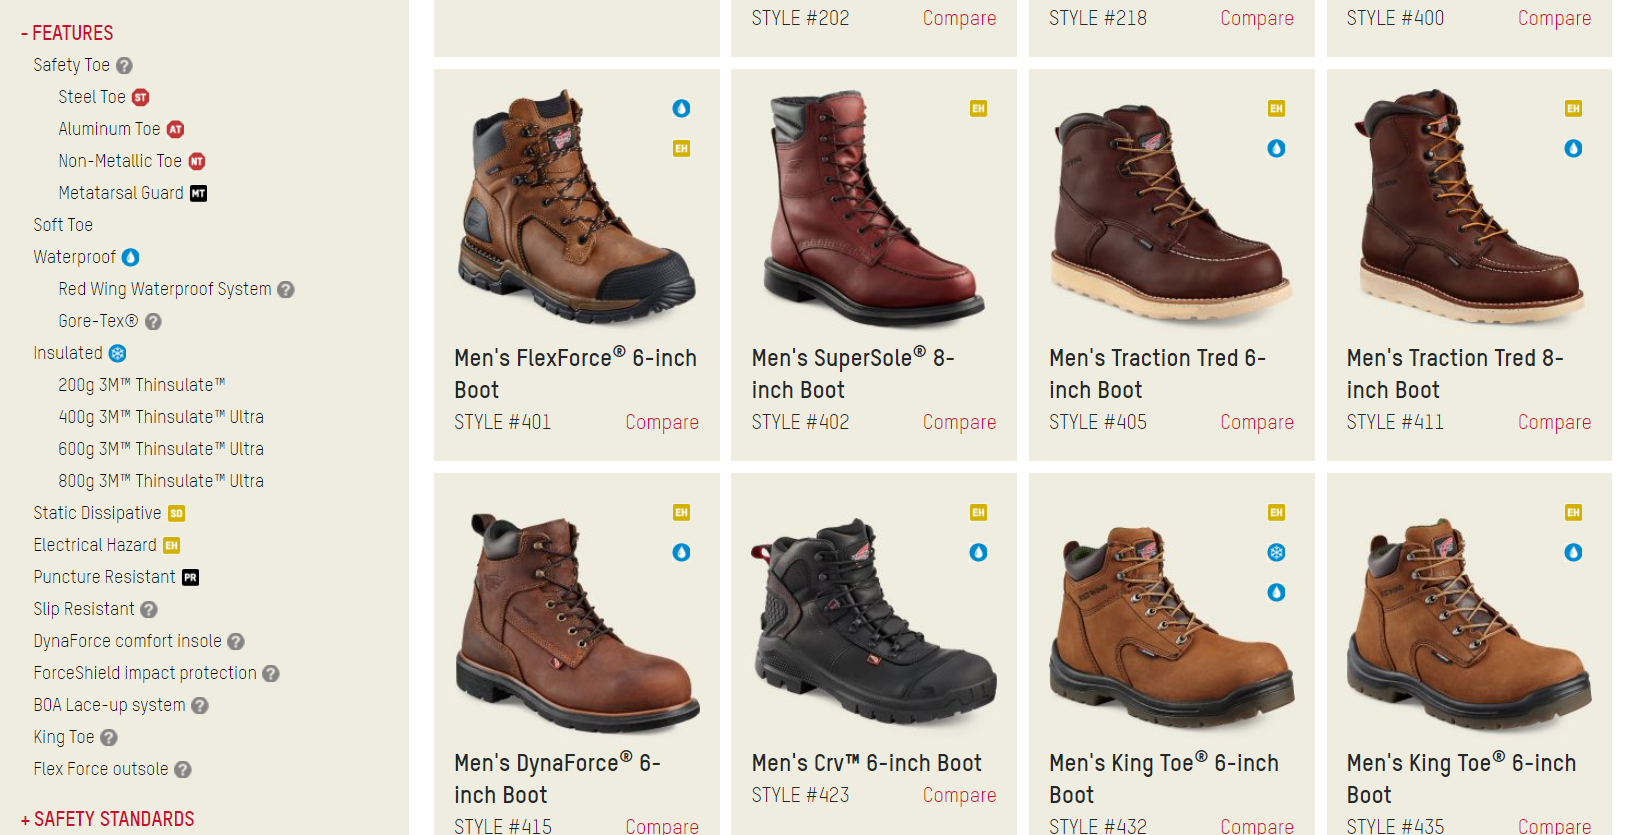 red wing work boots store locations near me